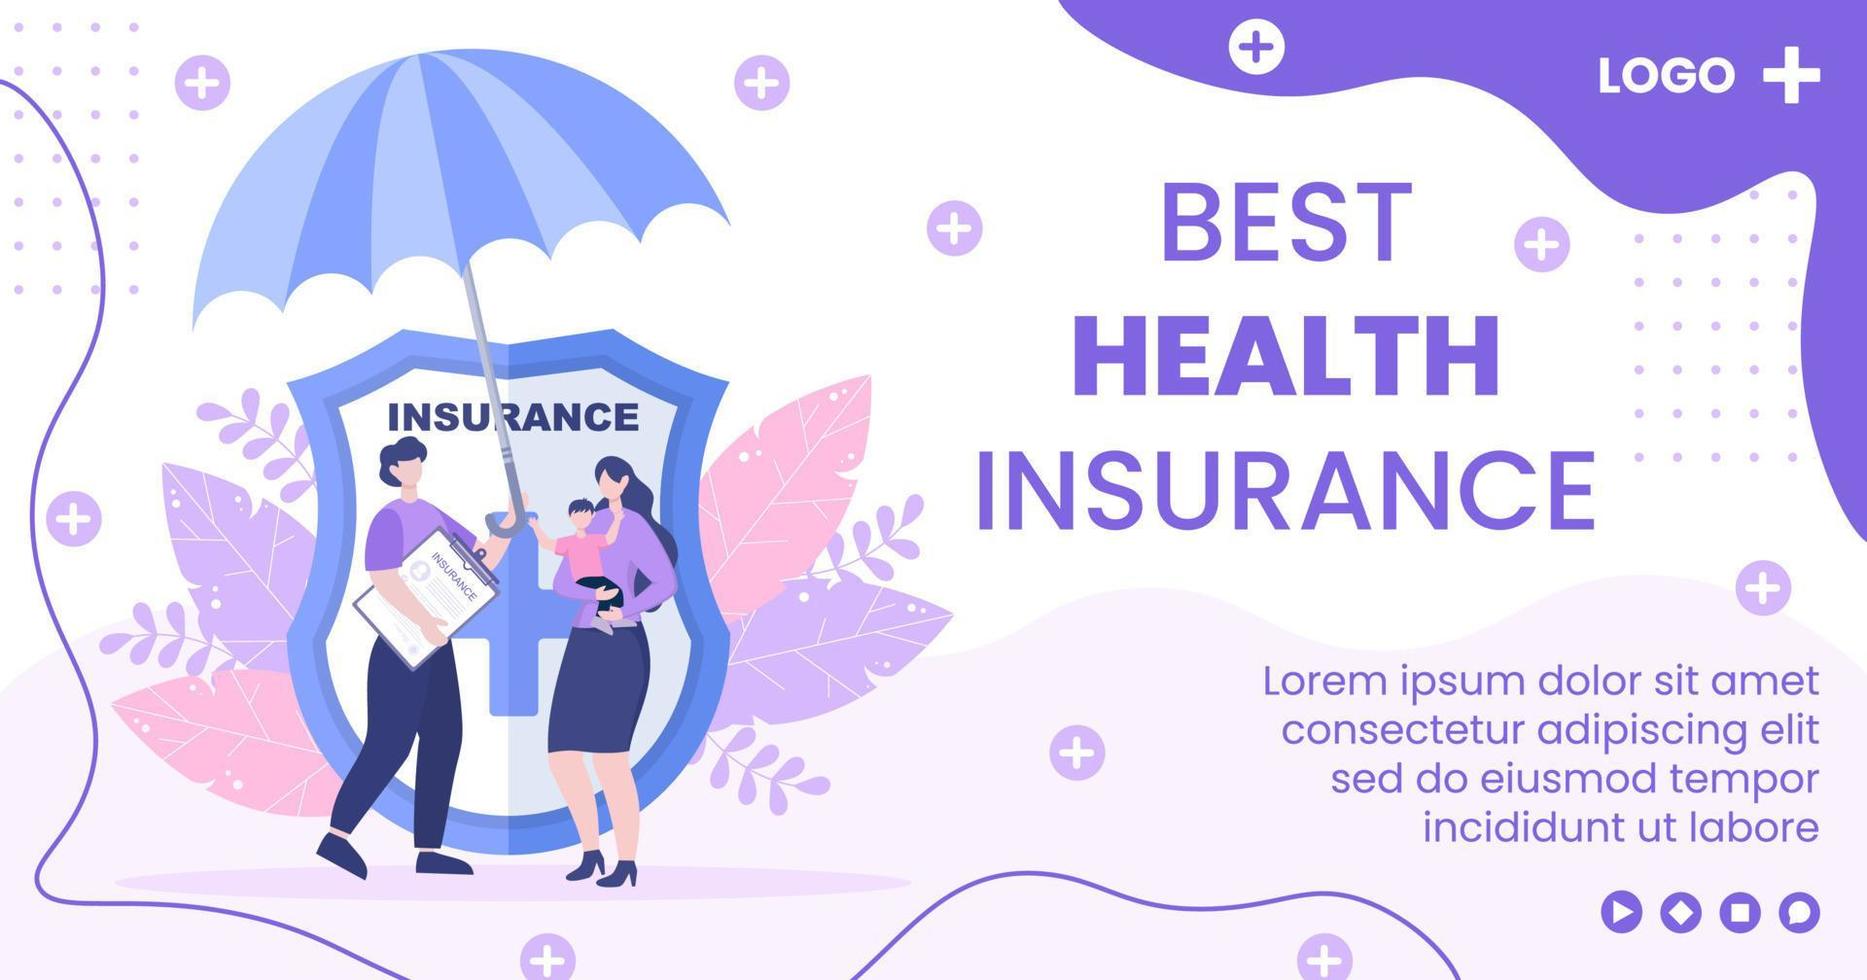 Health care Insurance Post Template Flat Design Illustration Editable of Square Background for Social media, Greeting Card or Web Internet vector